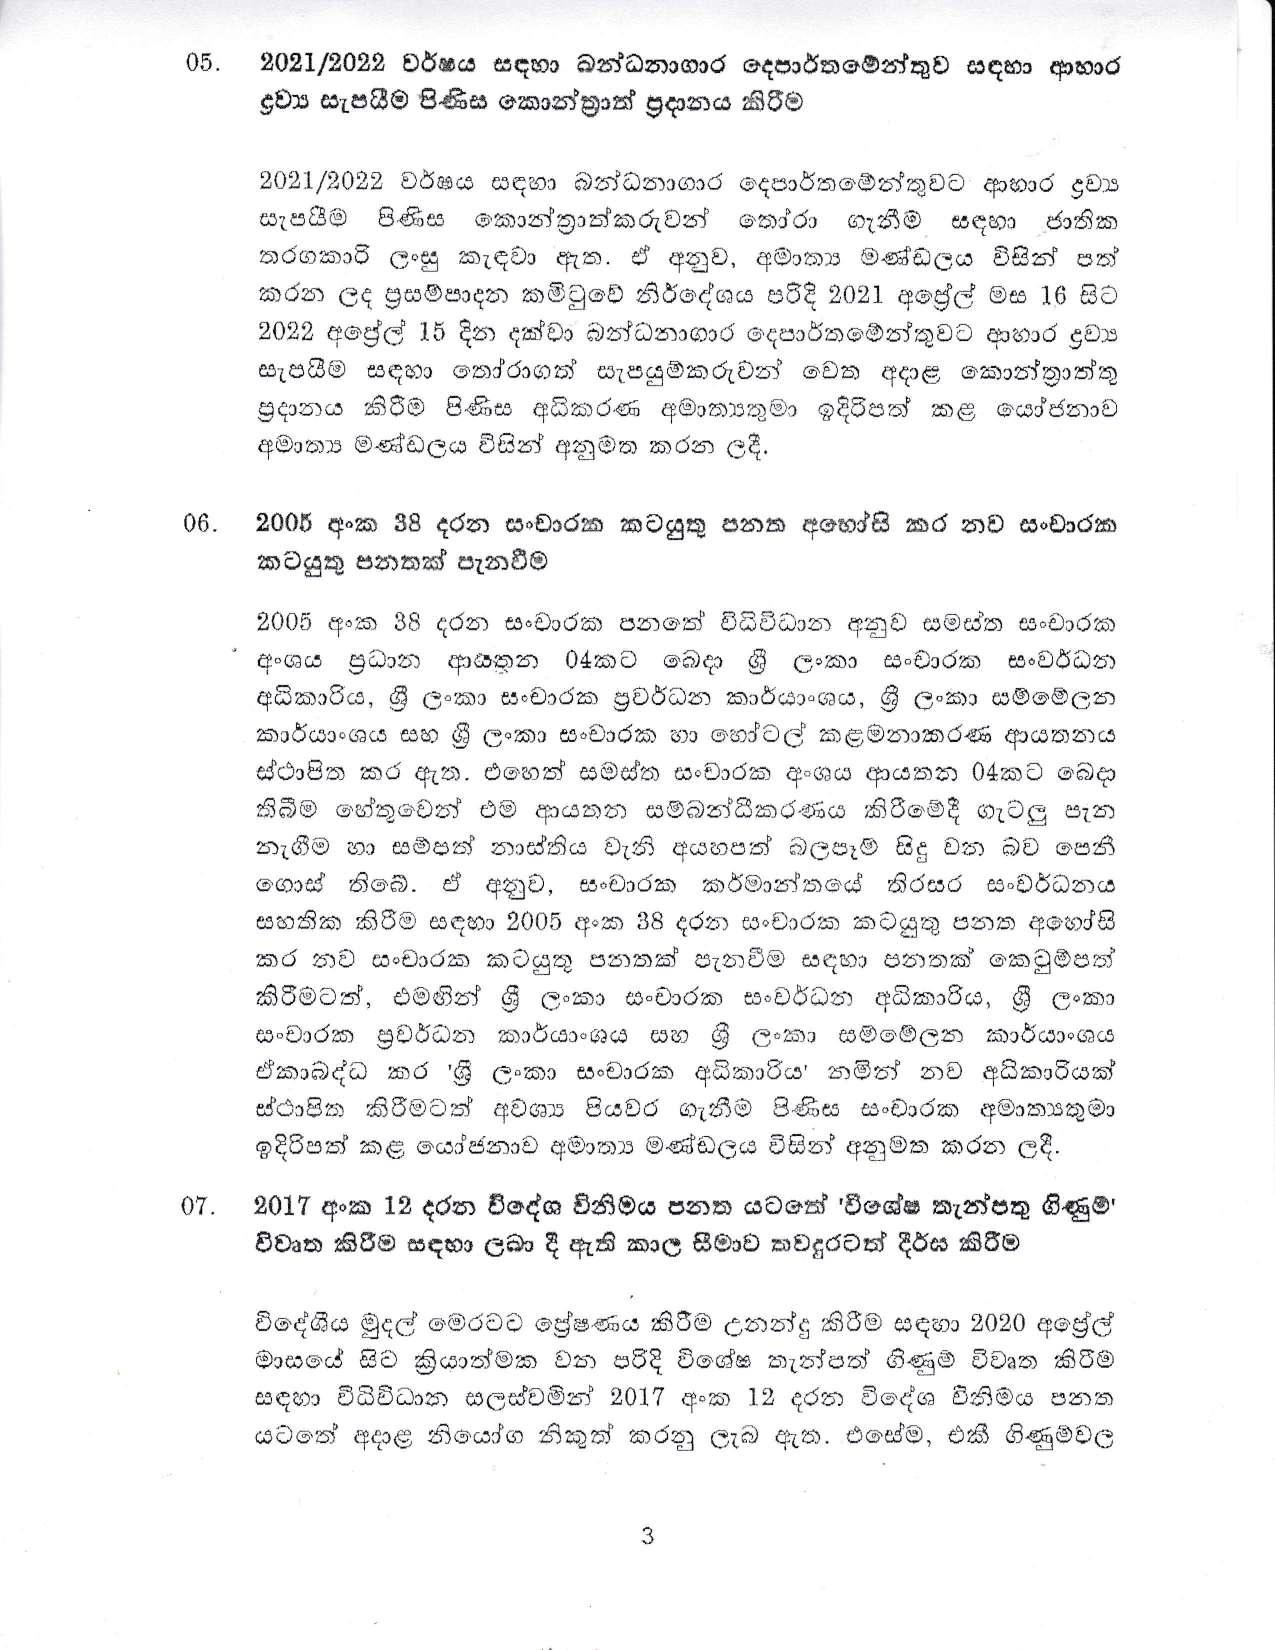 Cabinet Decision on 05.04.2021 Sinhala page 003